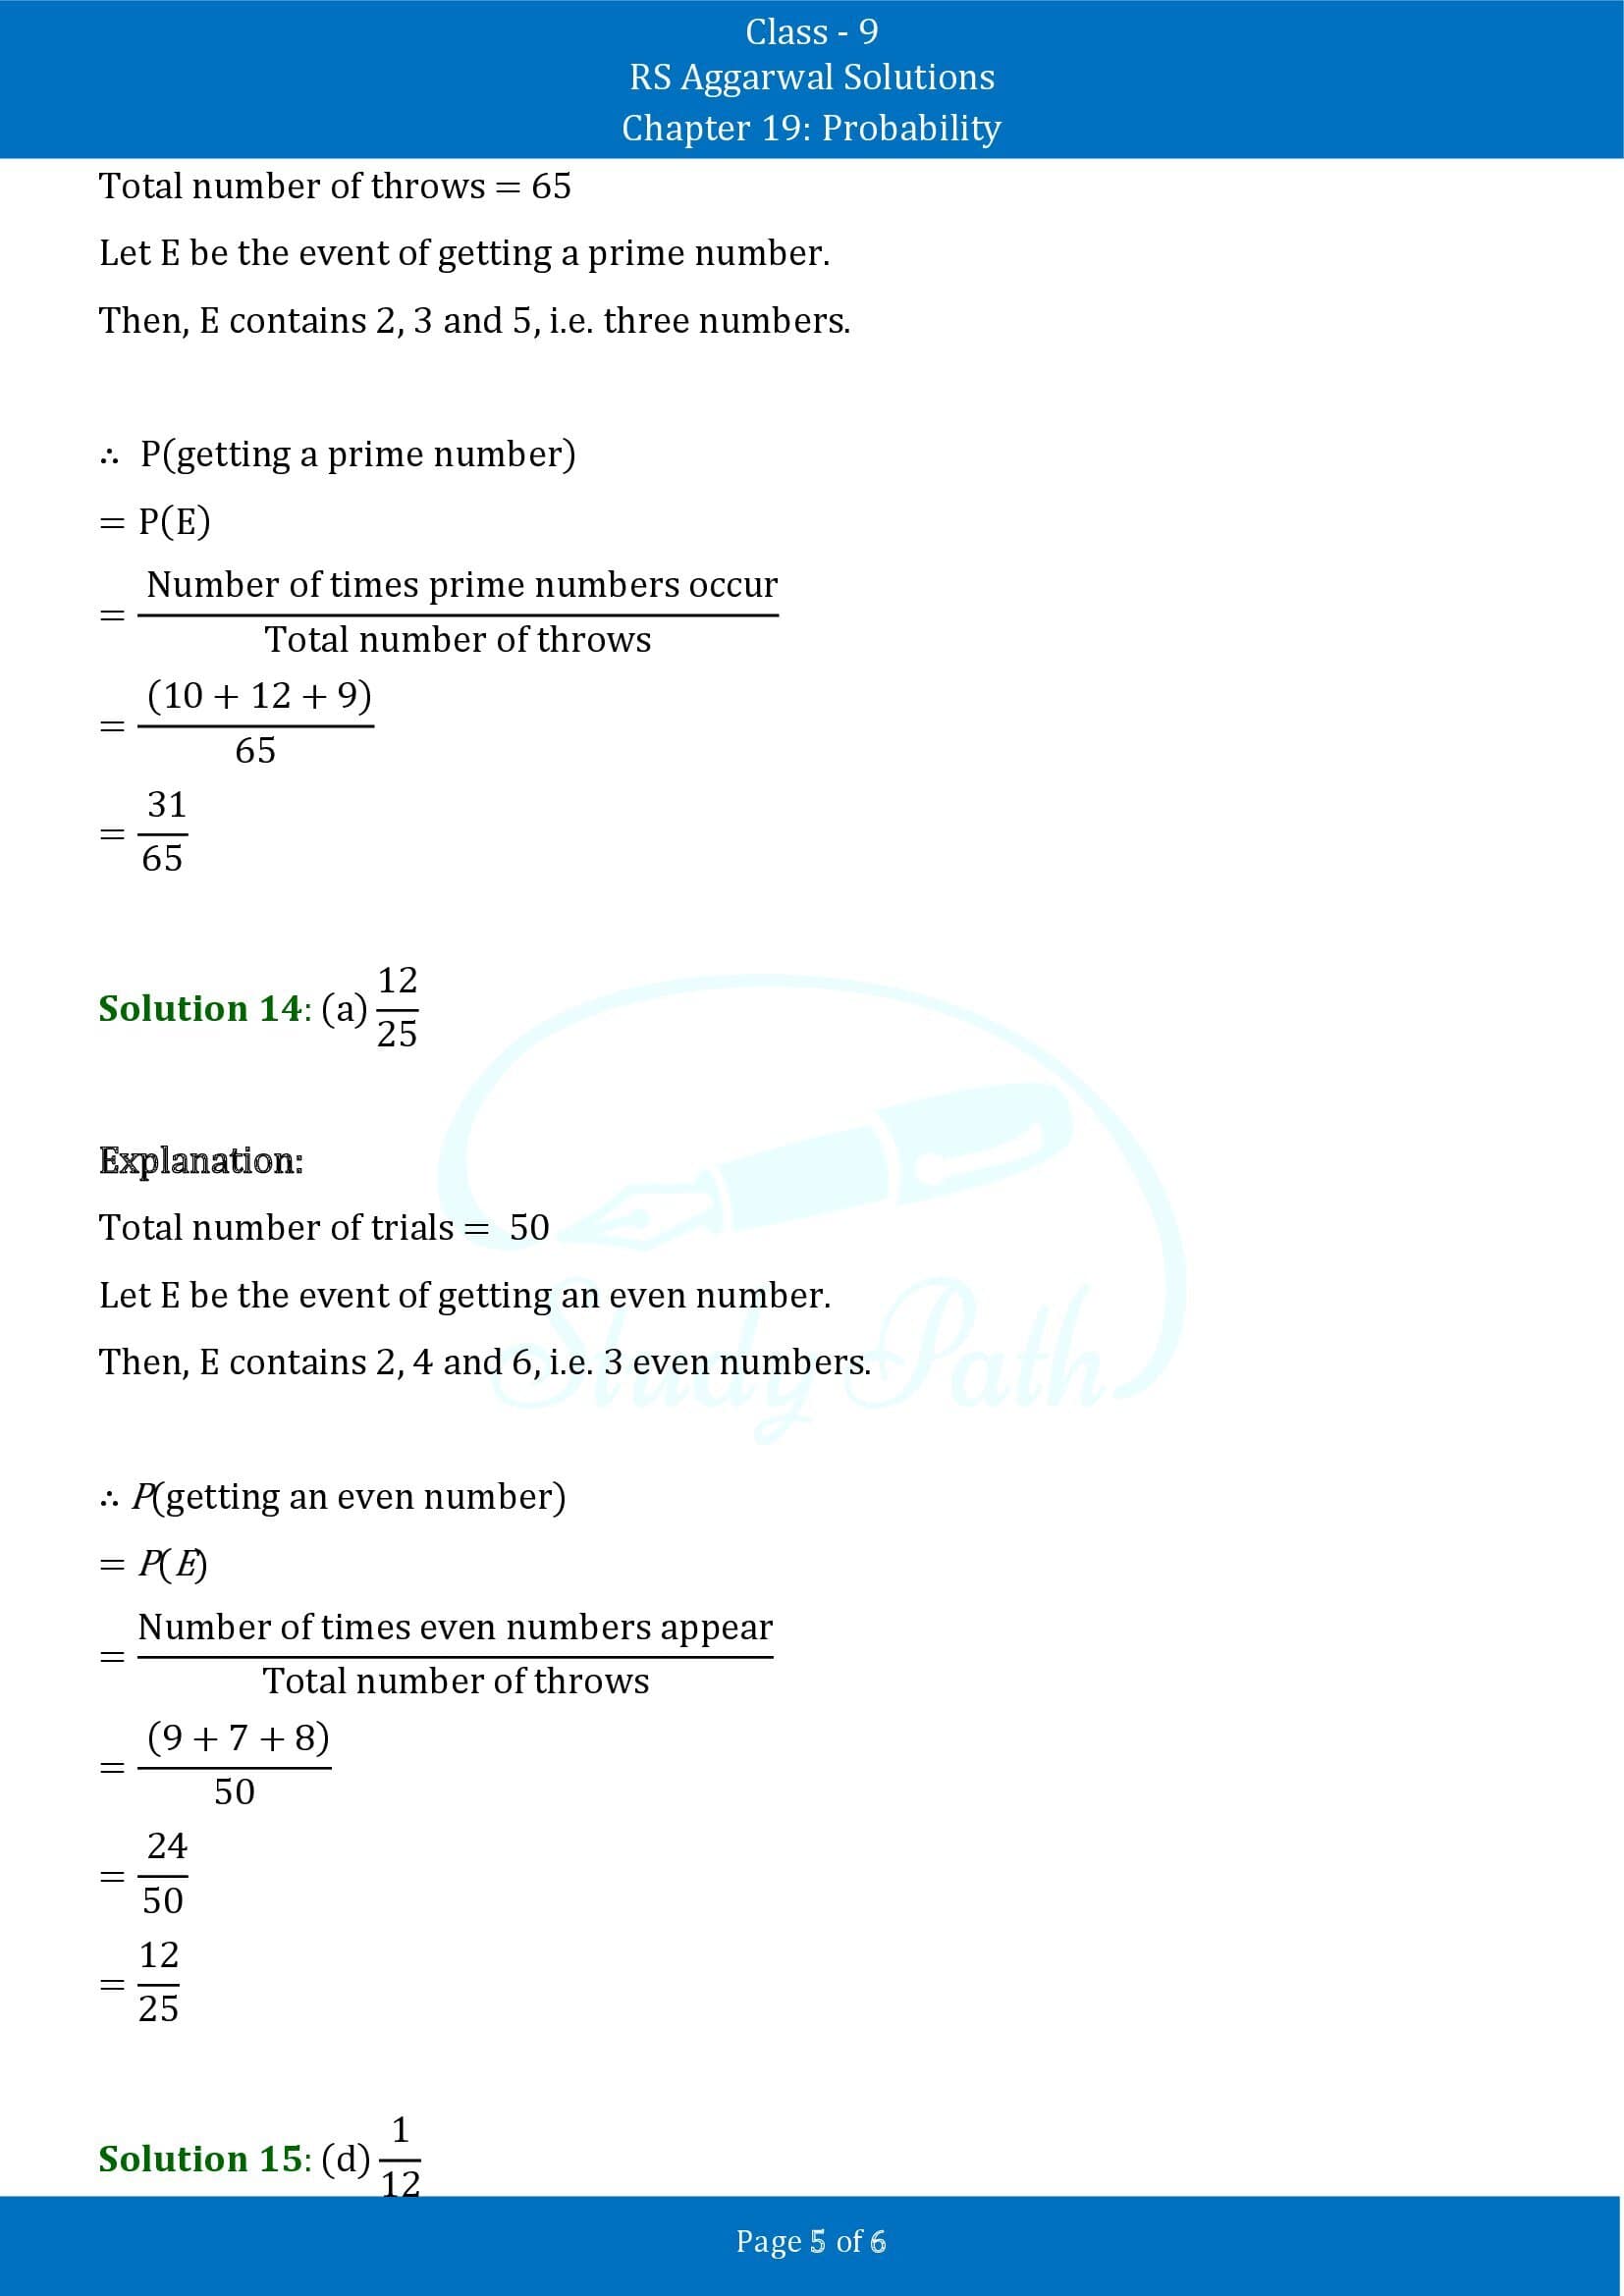 RS Aggarwal Solutions Class 9 Chapter 19 Probability Multiple Choice Questions MCQs 00005